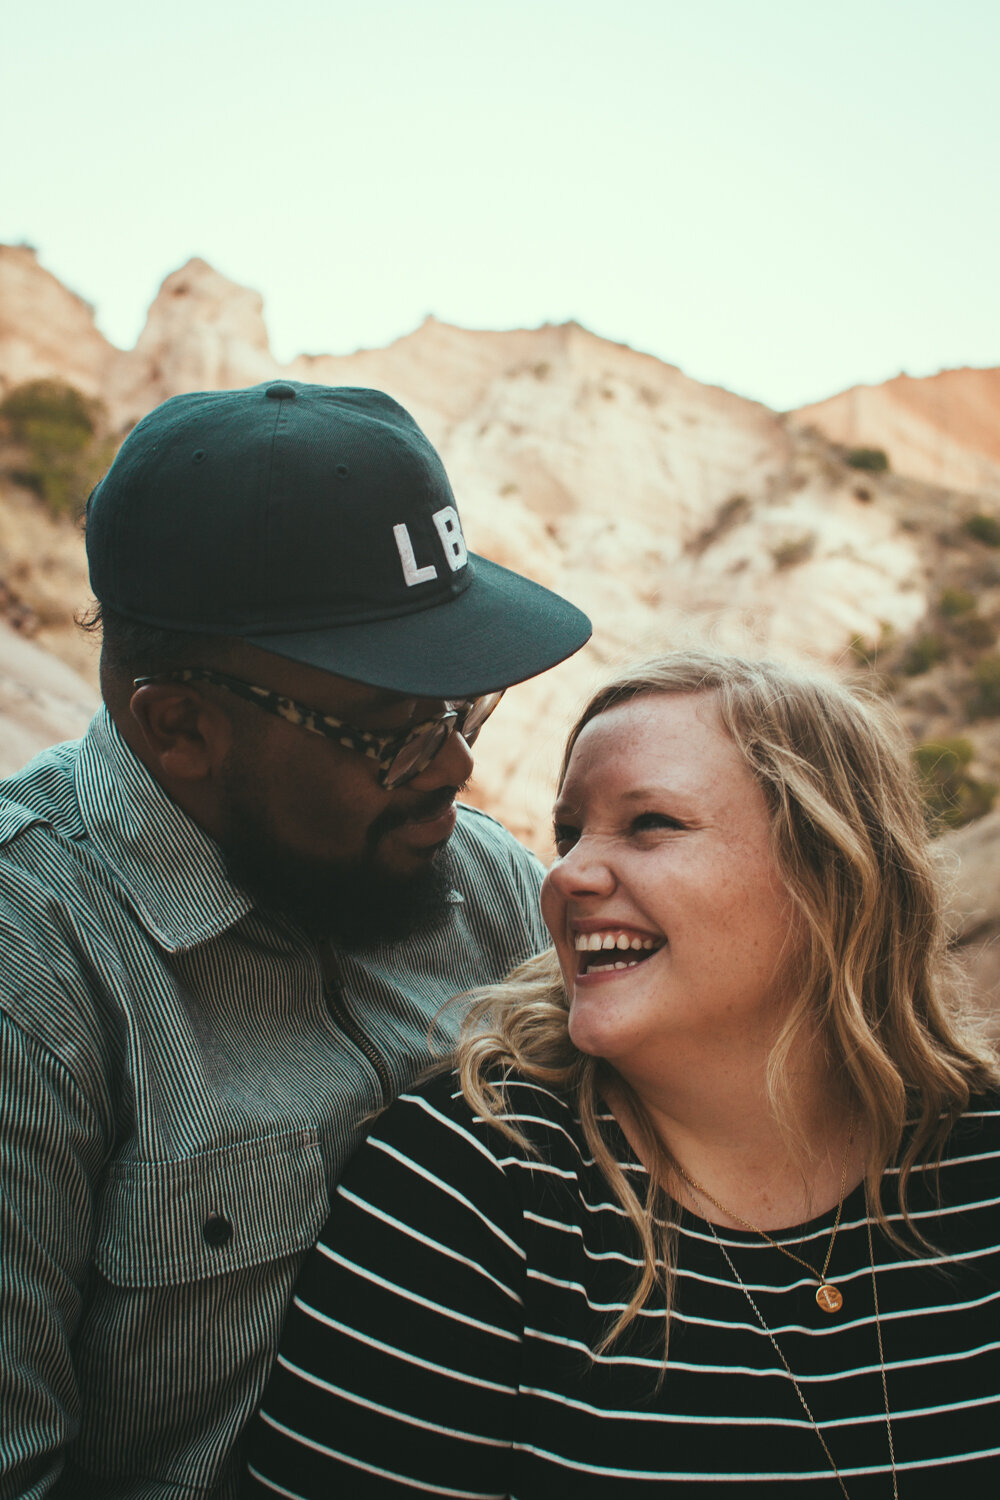 engagement engaged photography photographe marriage wedding photographer corse corsica california desert foothill ranch whiting lifestyle Anza Creative-22.jpg